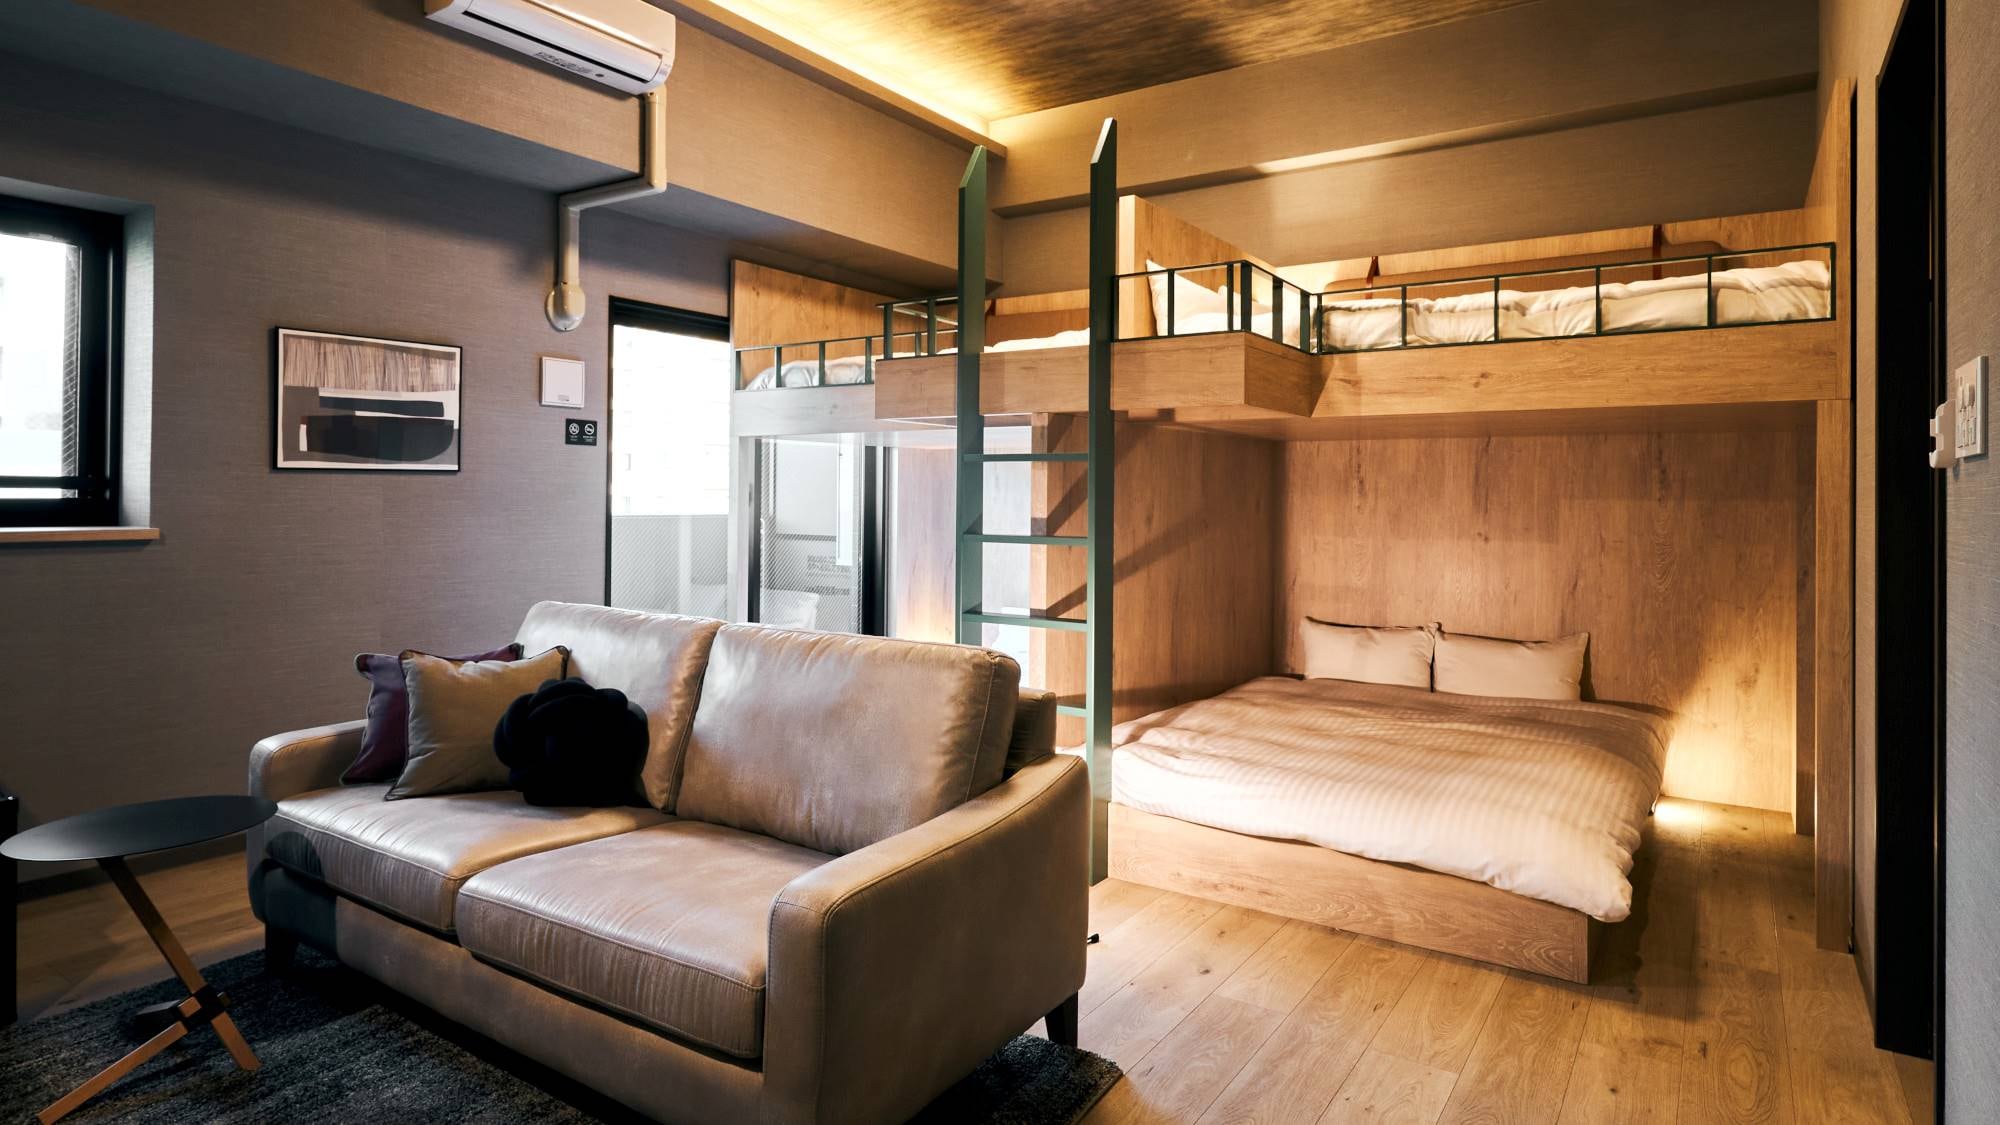 Up to 8 people can stay in Family 8 / Bunk Bed